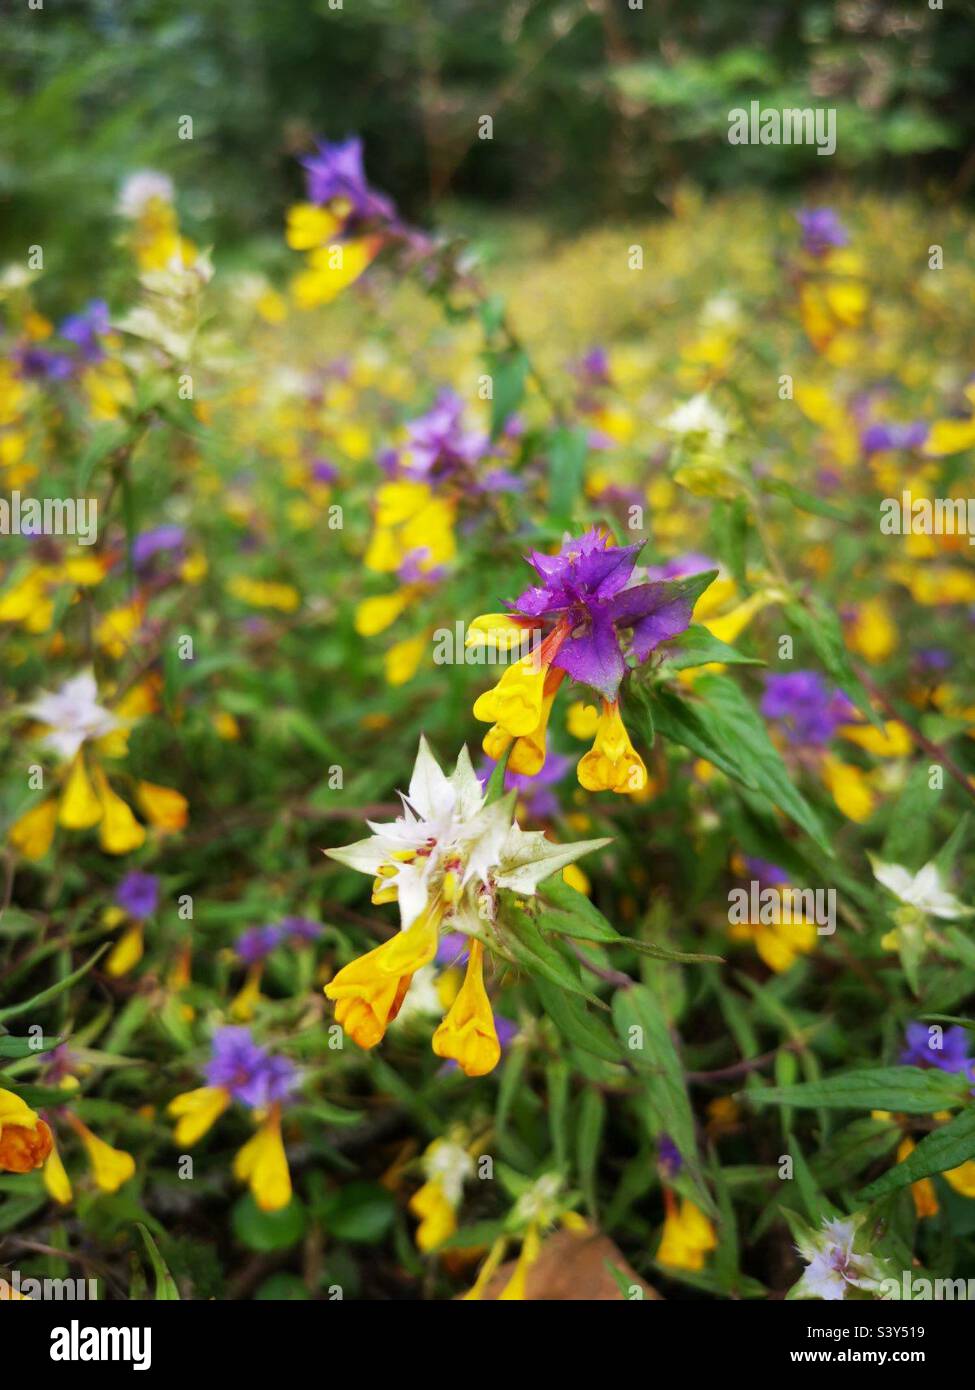 Heralds of spring.  Excited nature. Stock Photo